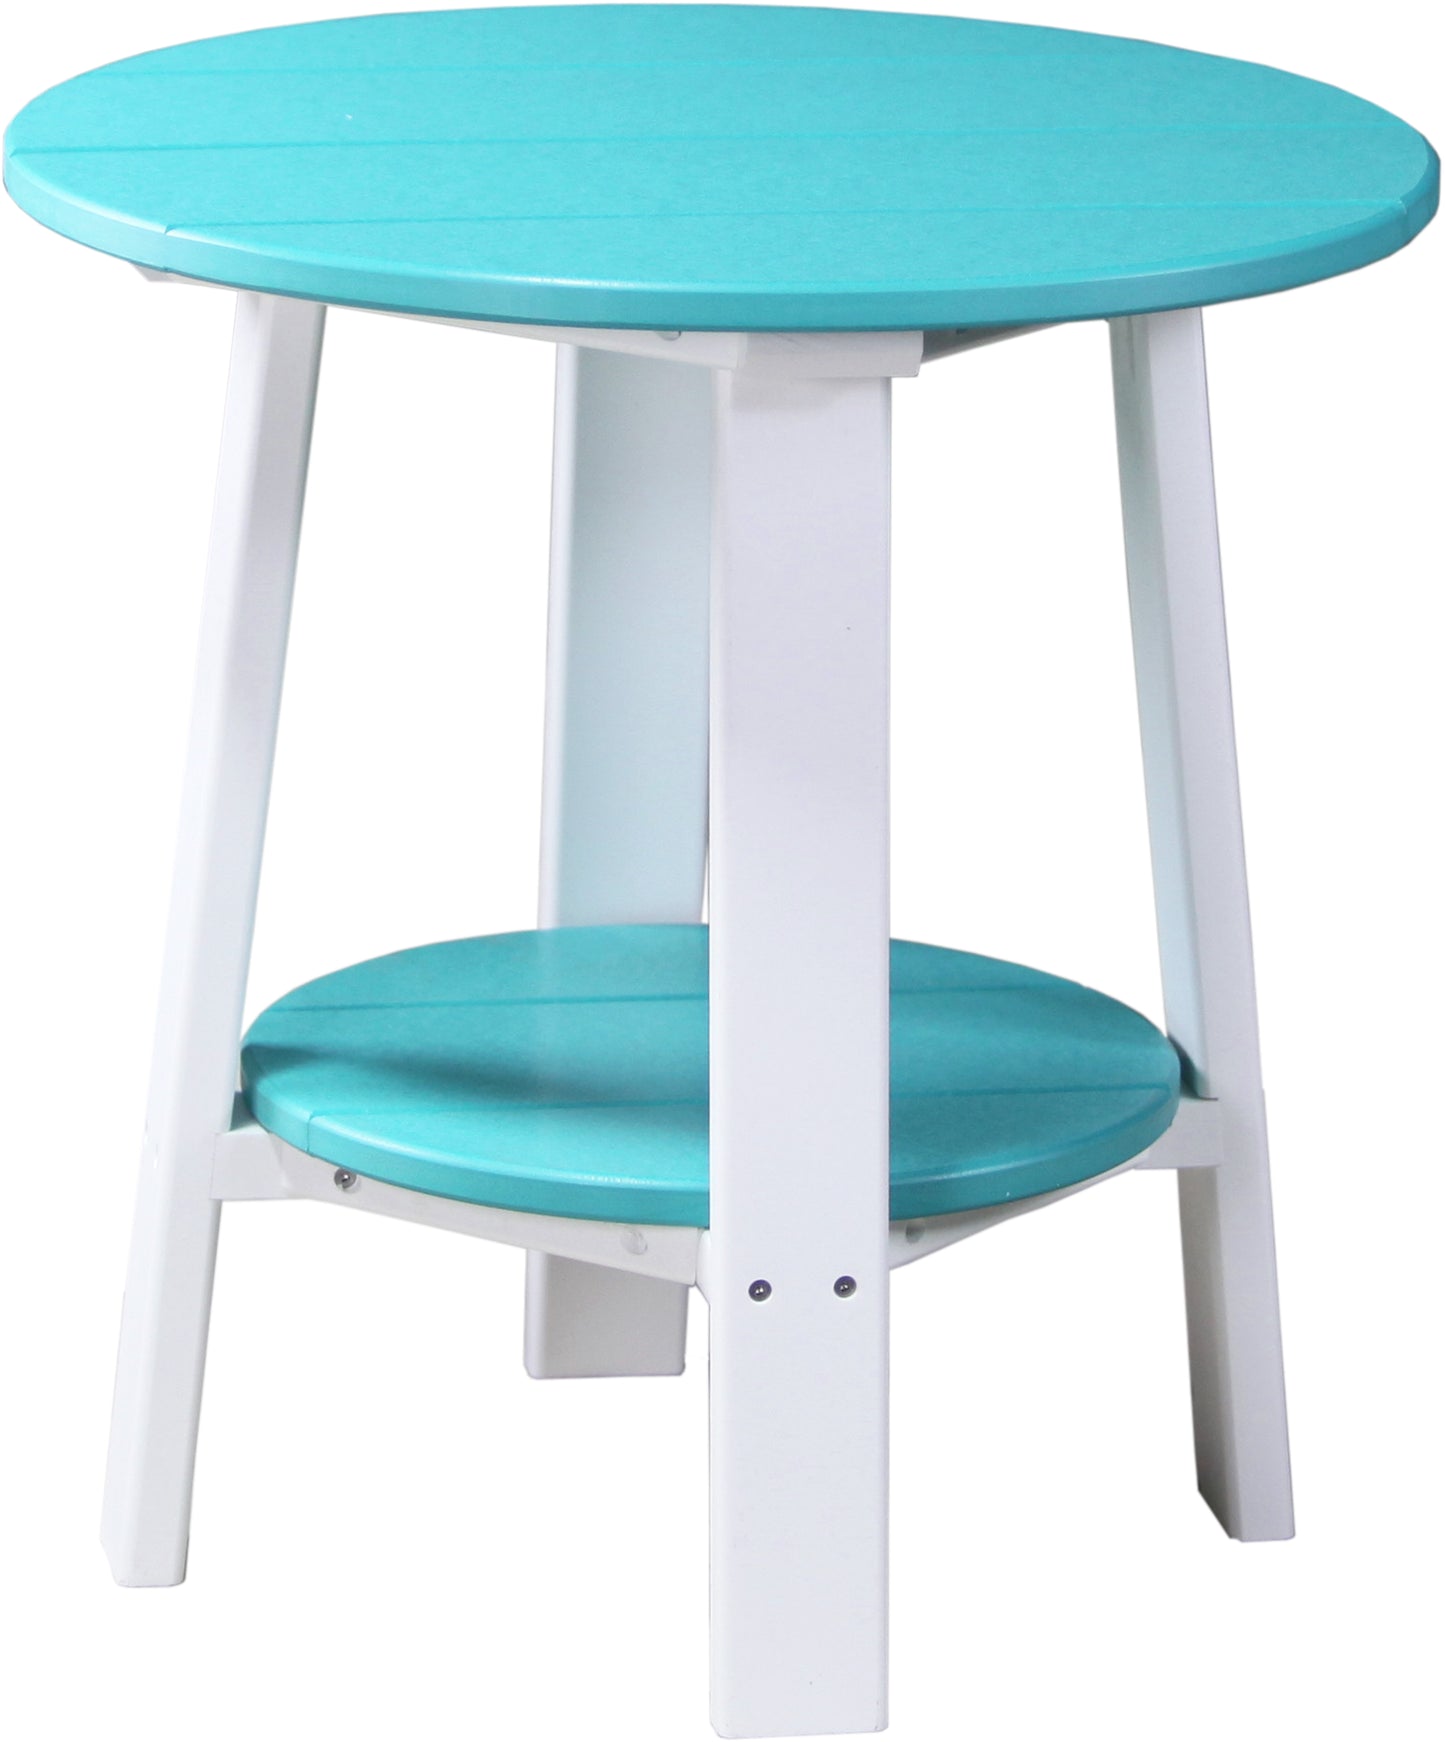 LuxCraft Recycled Plastic 21.5" Deluxe End Table  - LEAD TIME TO SHIP 10 to 12 BUSINESS DAYS